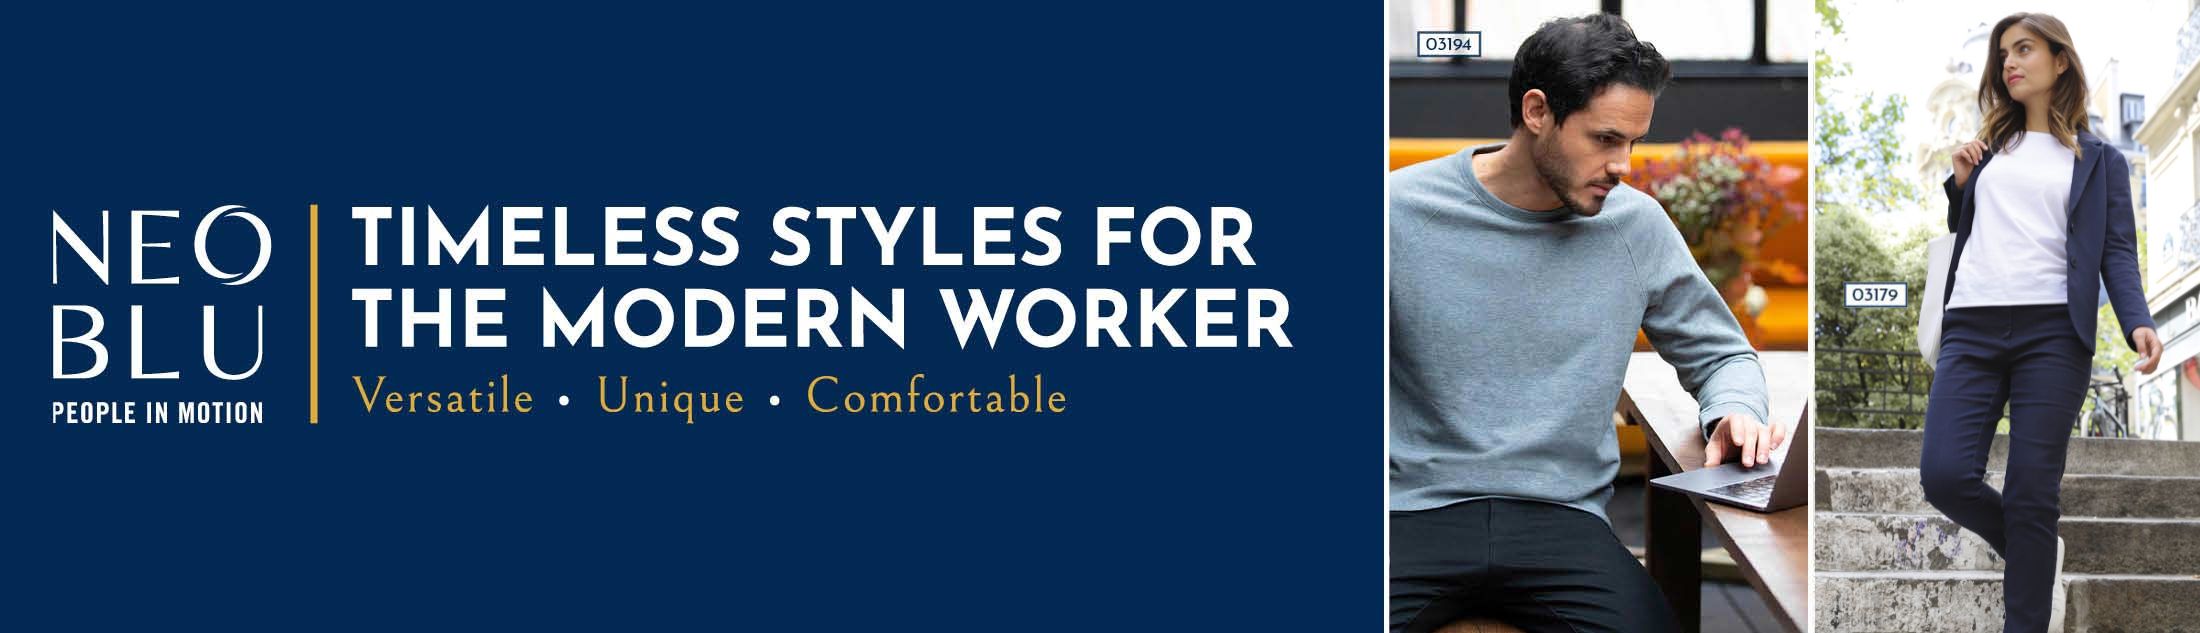 NEOBLU - Styles for the modern worker